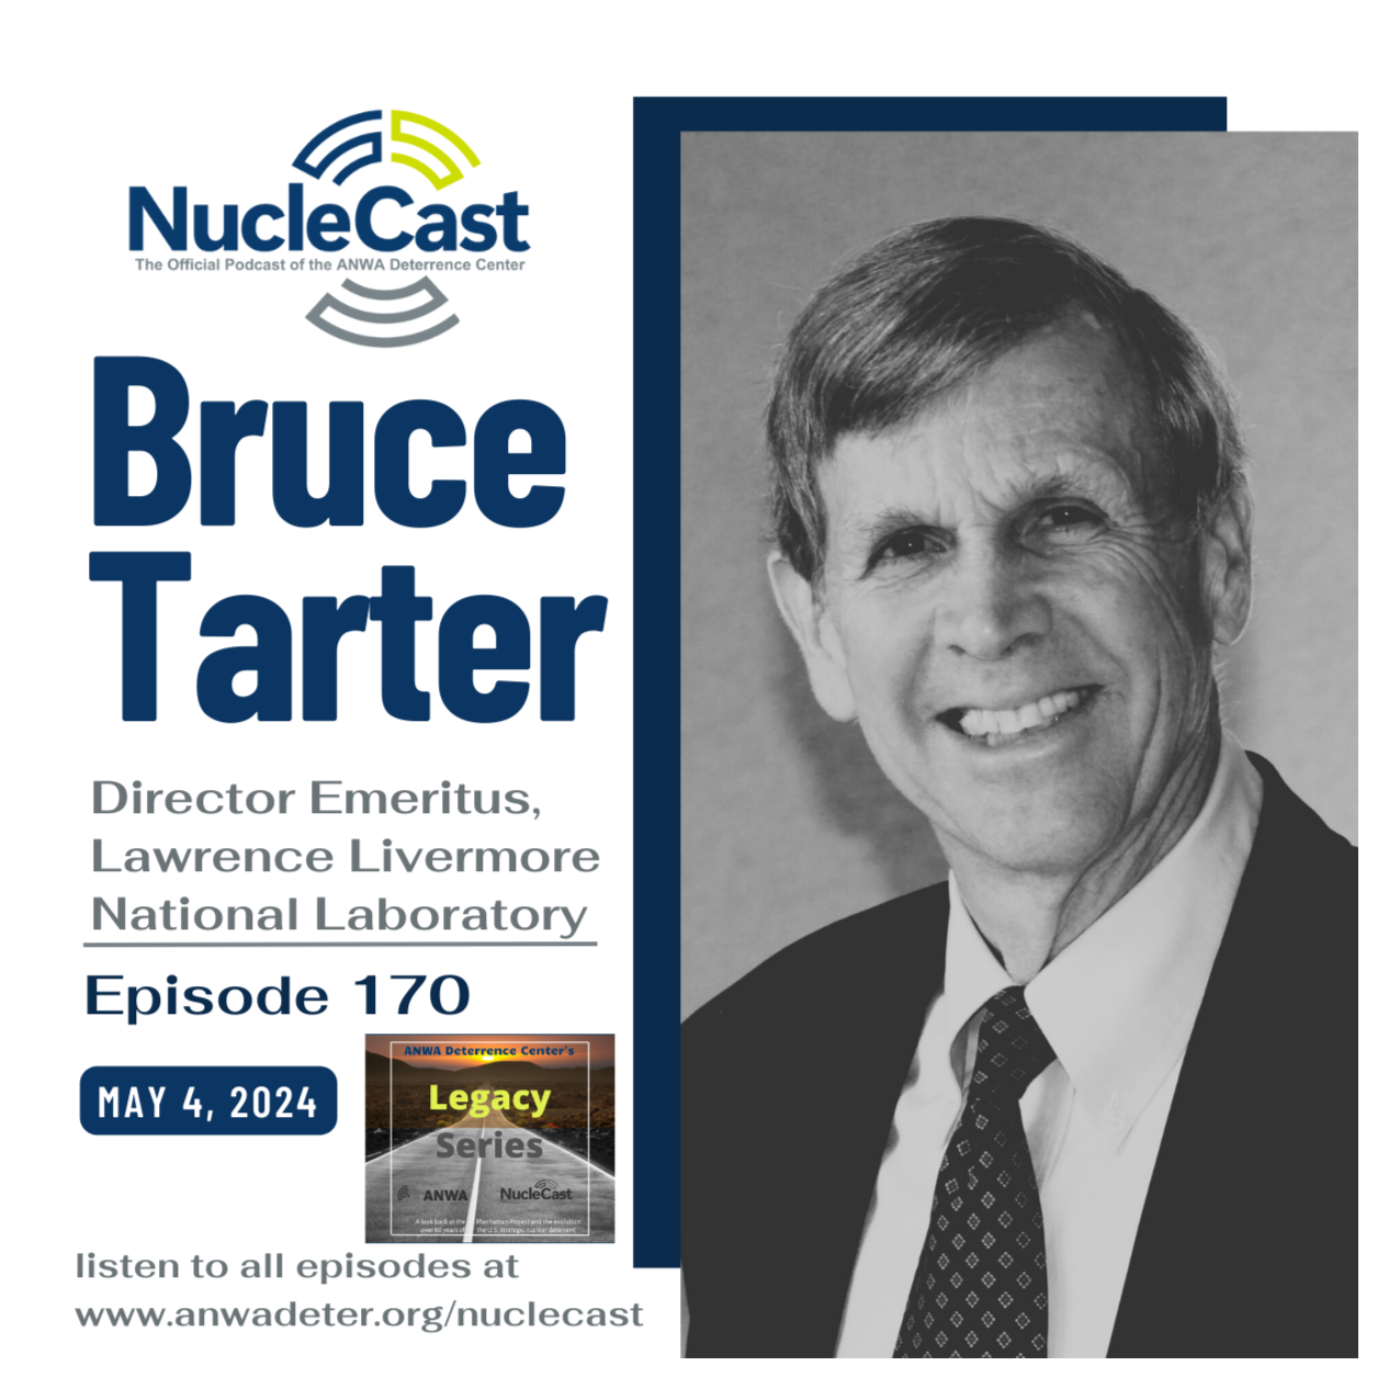 Bruce Tarter - LLNL's Technology, the Development of Nuclear Weapons, and the Era of Stockpile Stewardship